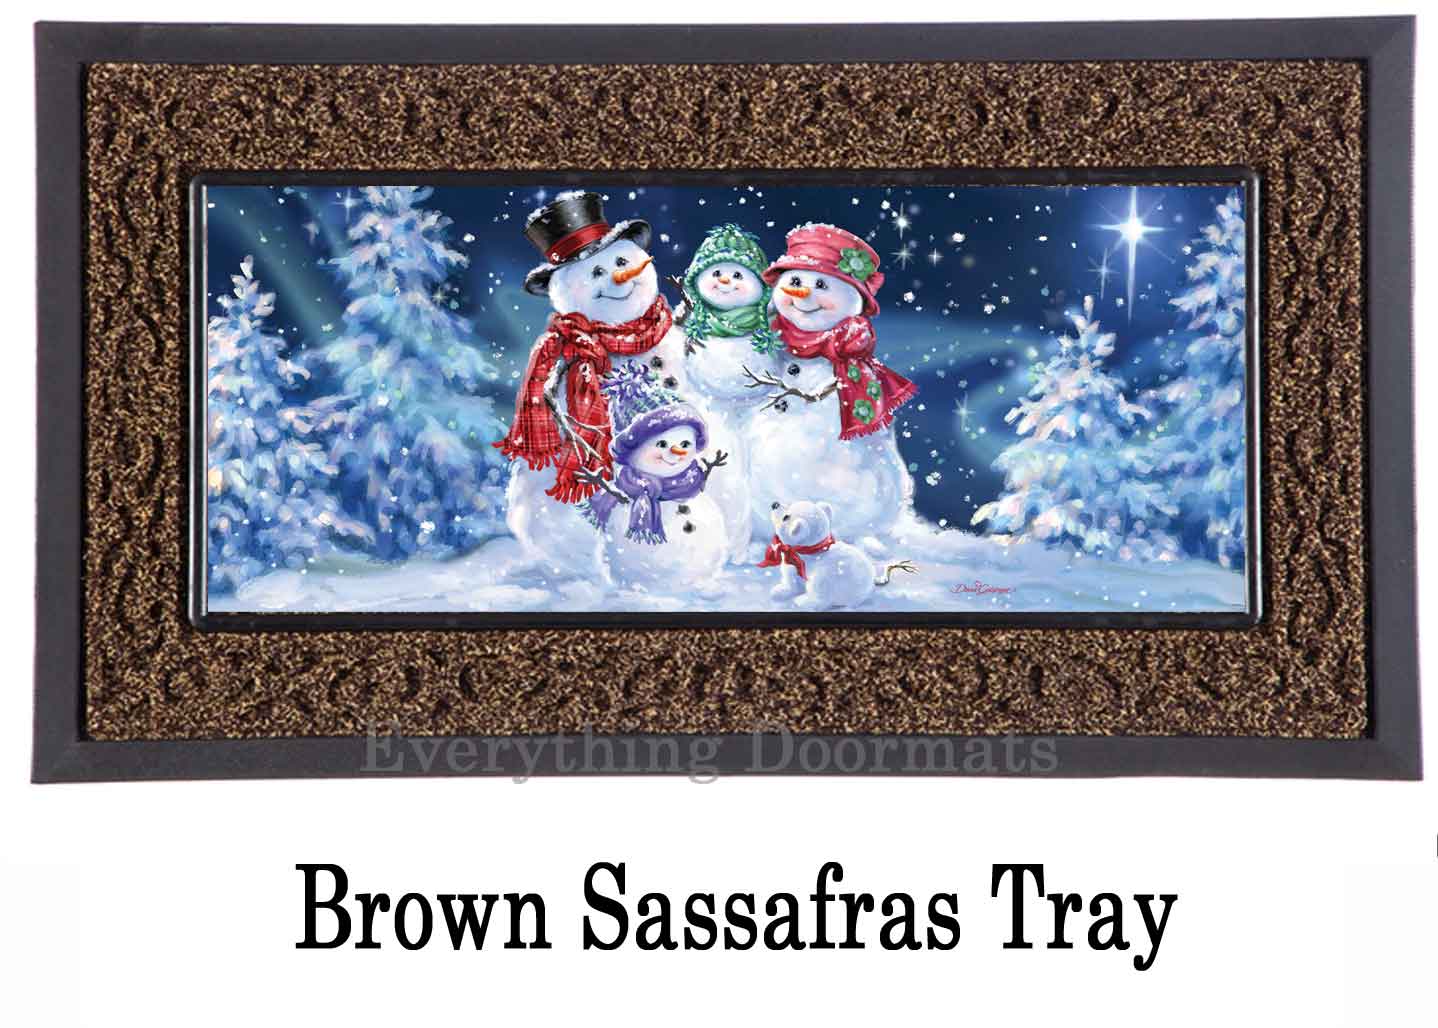 https://www.everythingdoormats.com/images/products/snowflake-family-sassafras-switch-insert-doormat-in-brown-insert-tray.jpg